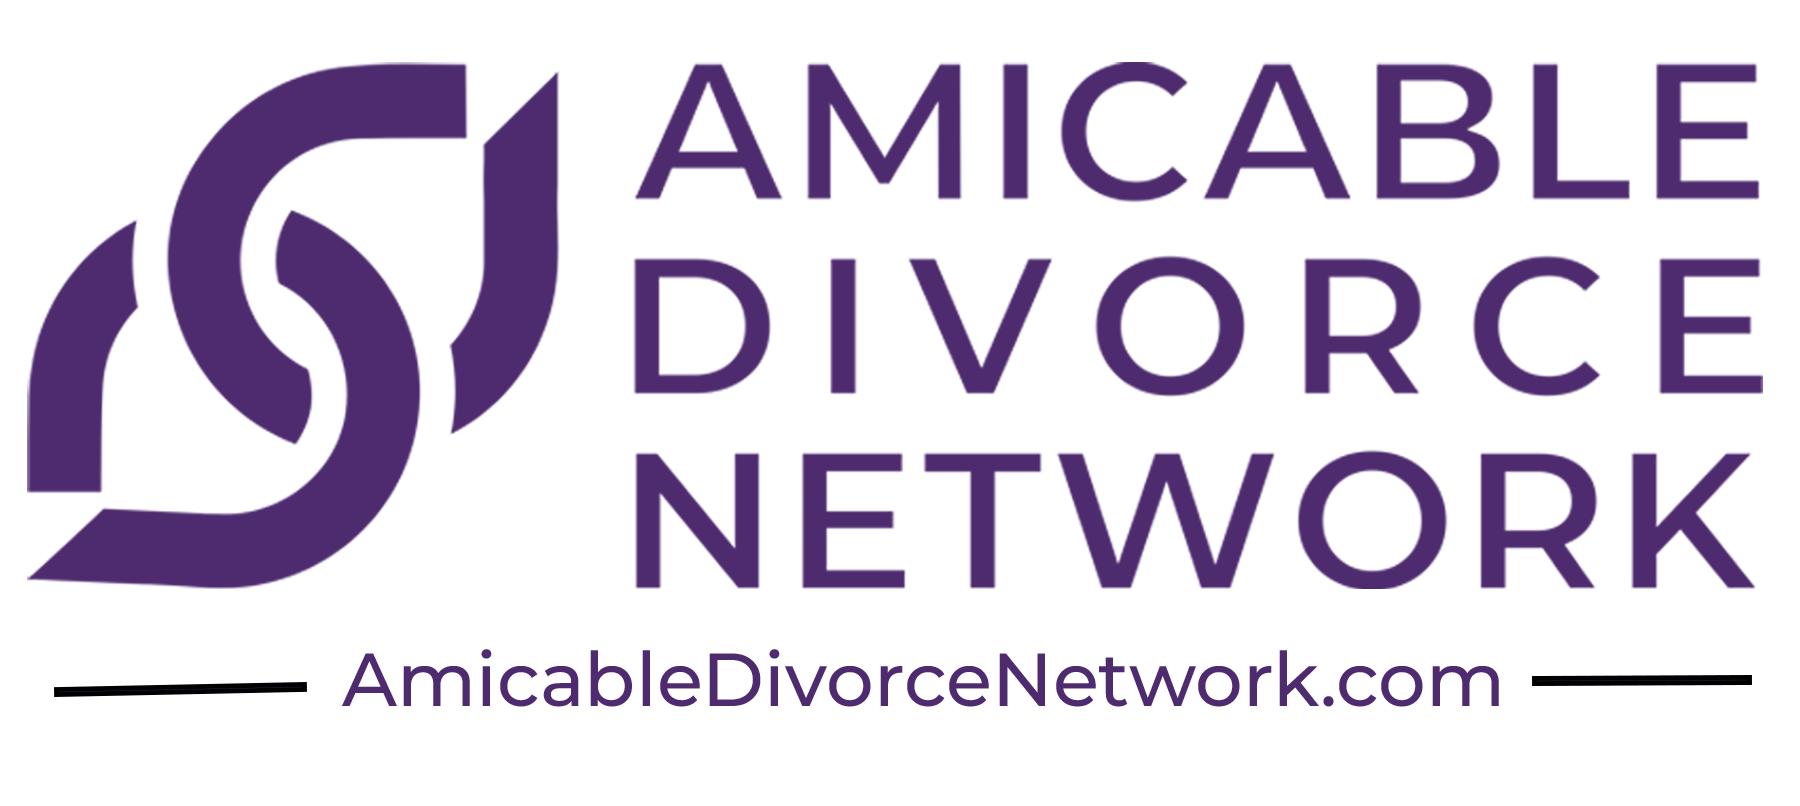 Purple logo for the Amicable DIvorce Network